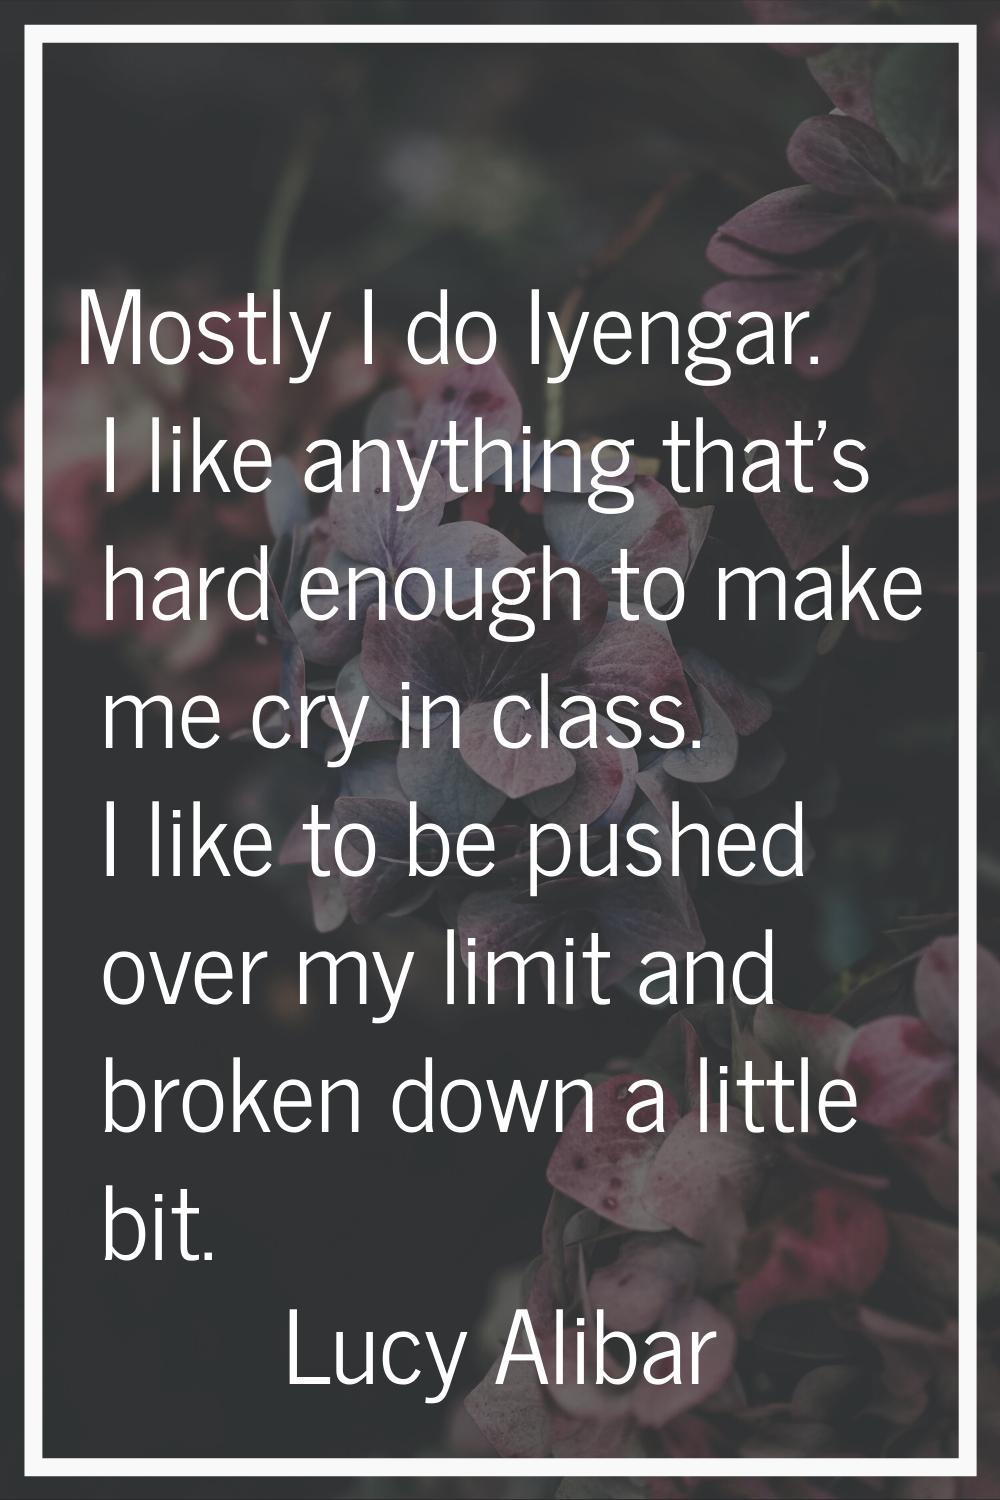 Mostly I do Iyengar. I like anything that's hard enough to make me cry in class. I like to be pushe